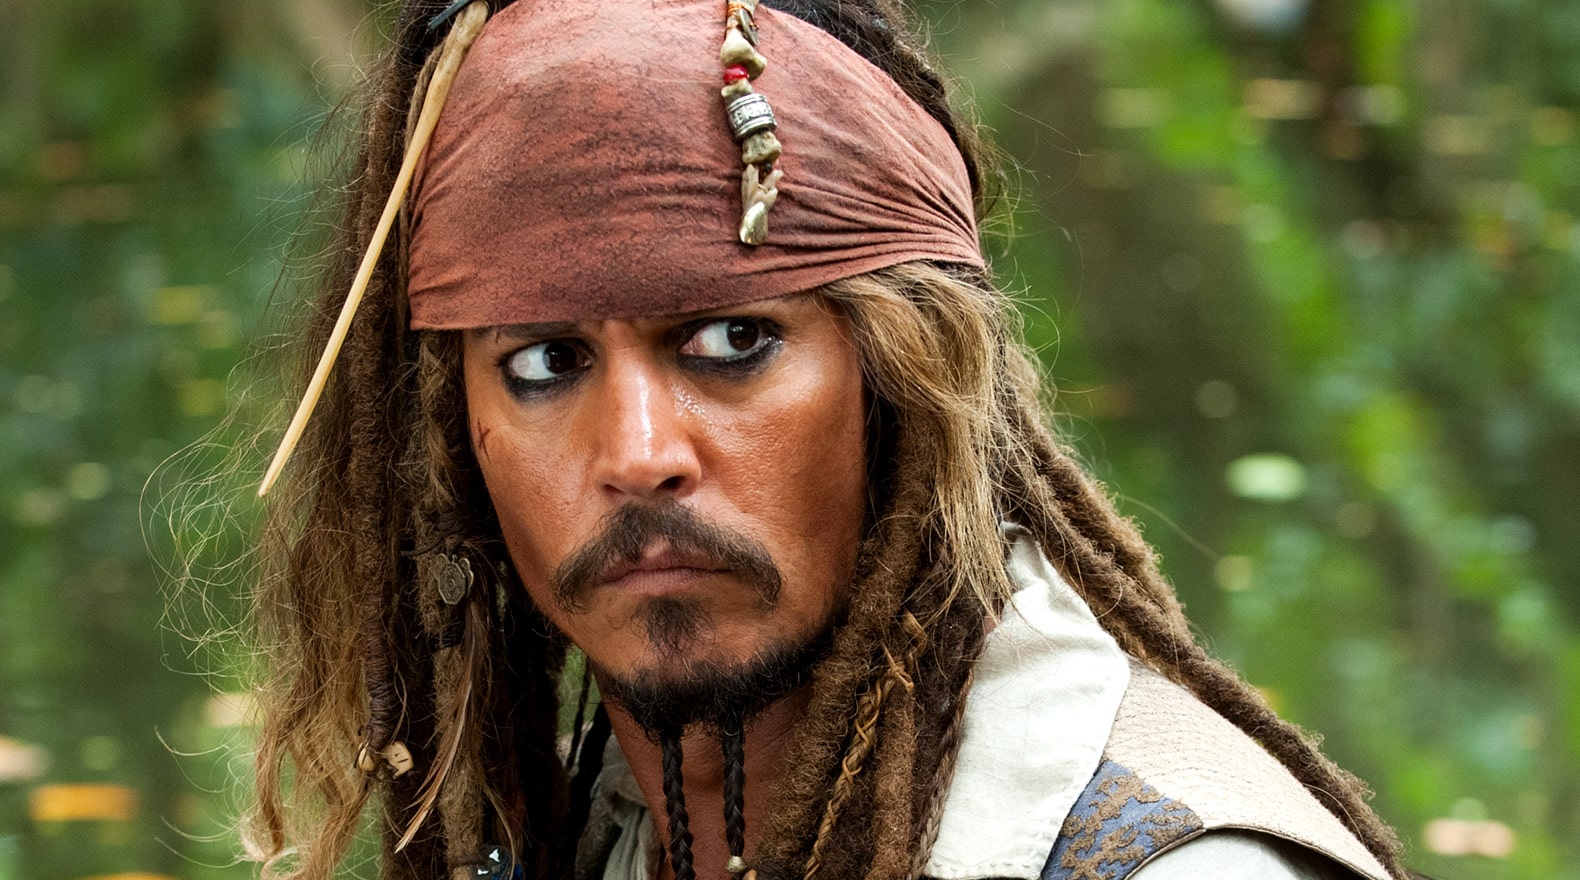 Johnny Depp's journey as Captain Jack Sparrow lasted from 2011 to 2017.